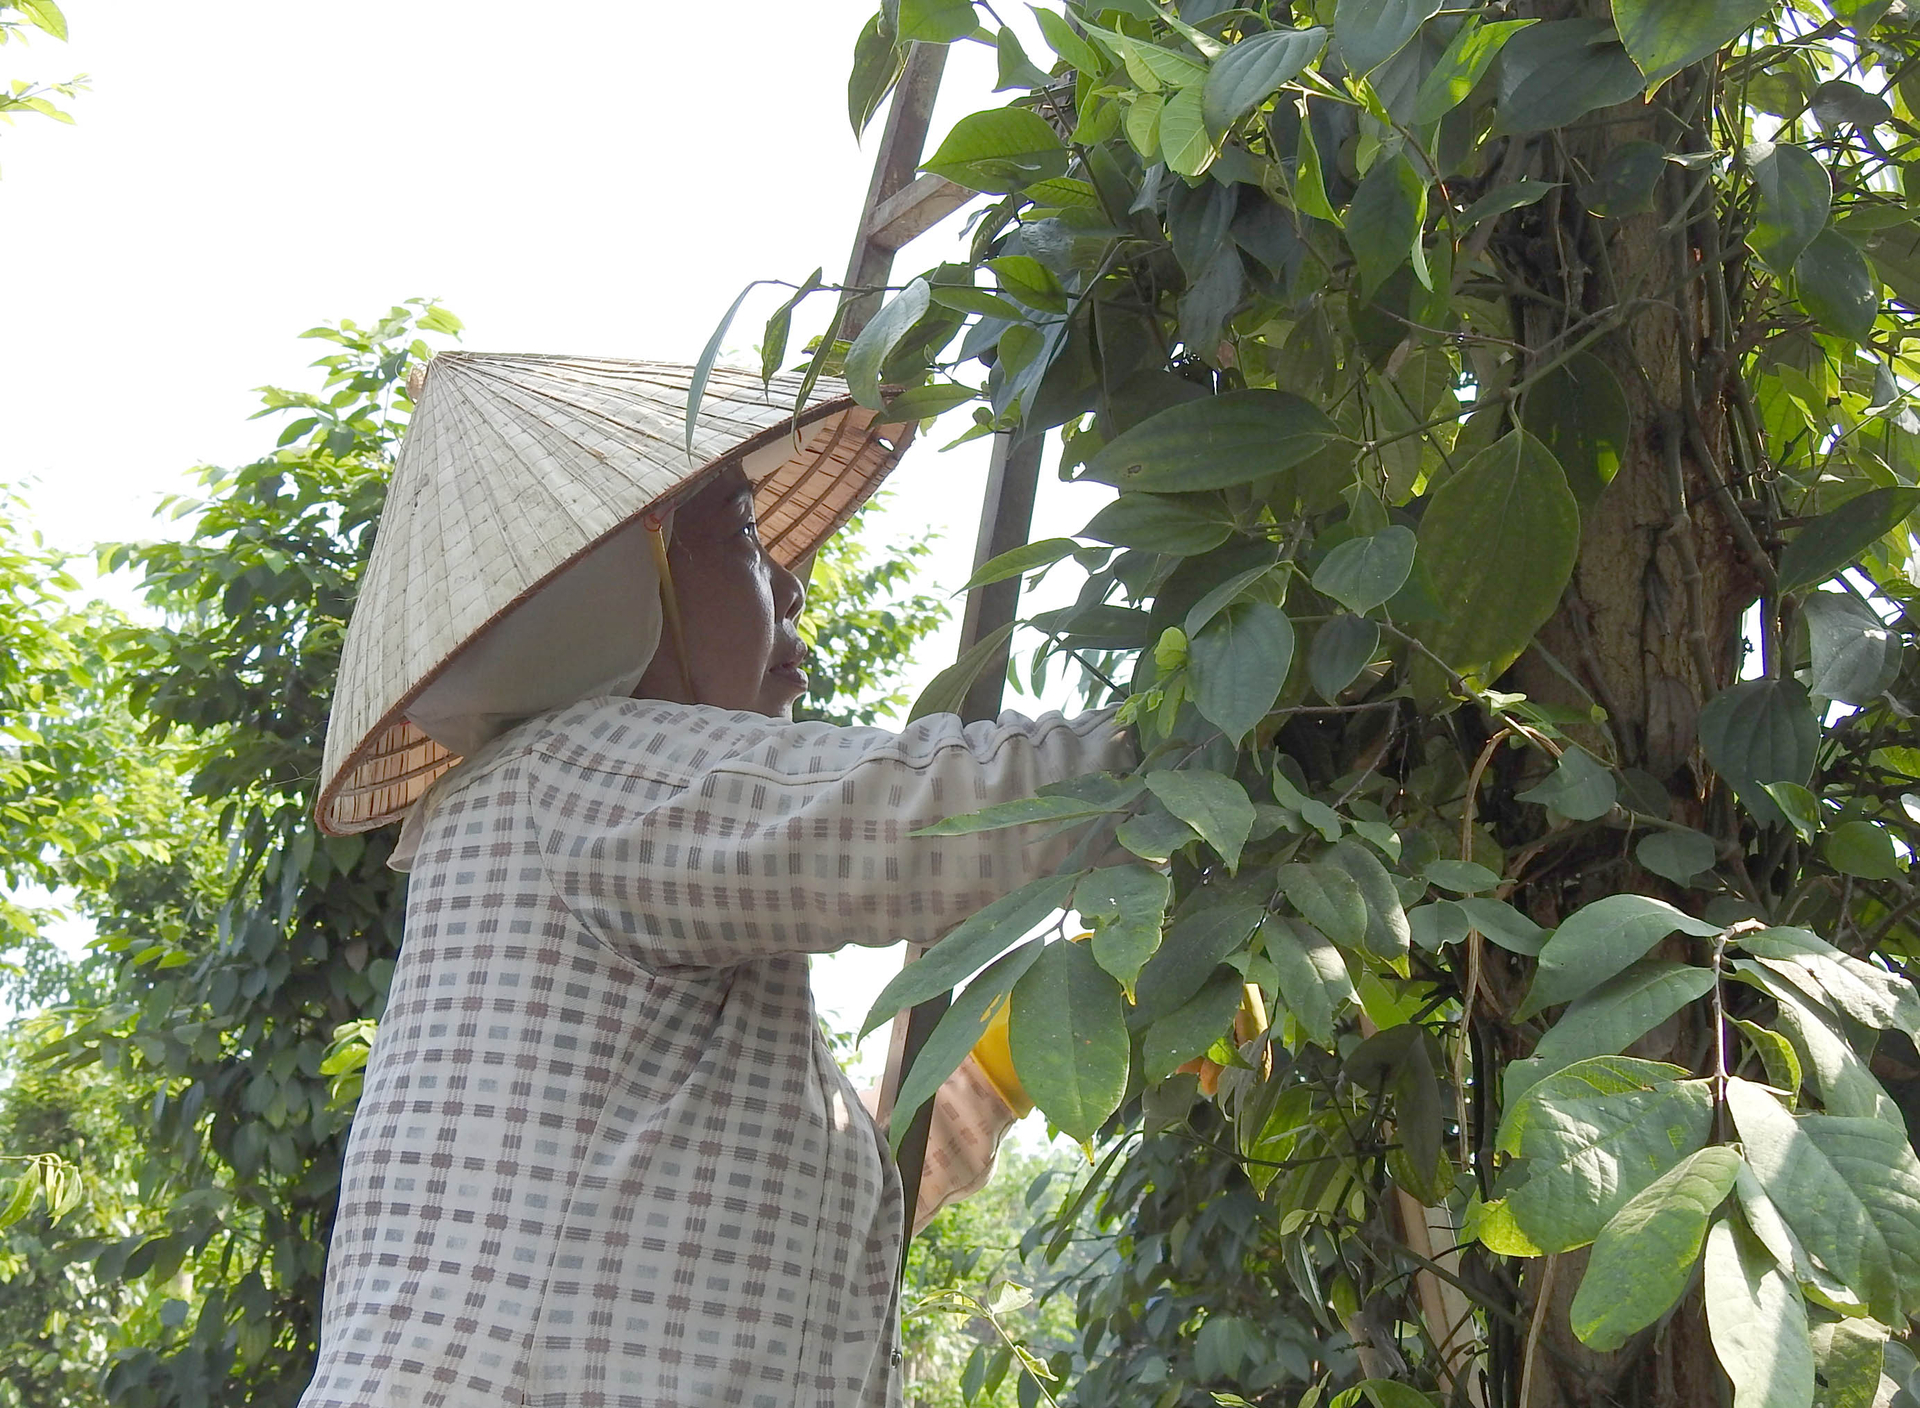 Farmers harvest pepper in Dong Nai province. Photo: Son Trang.